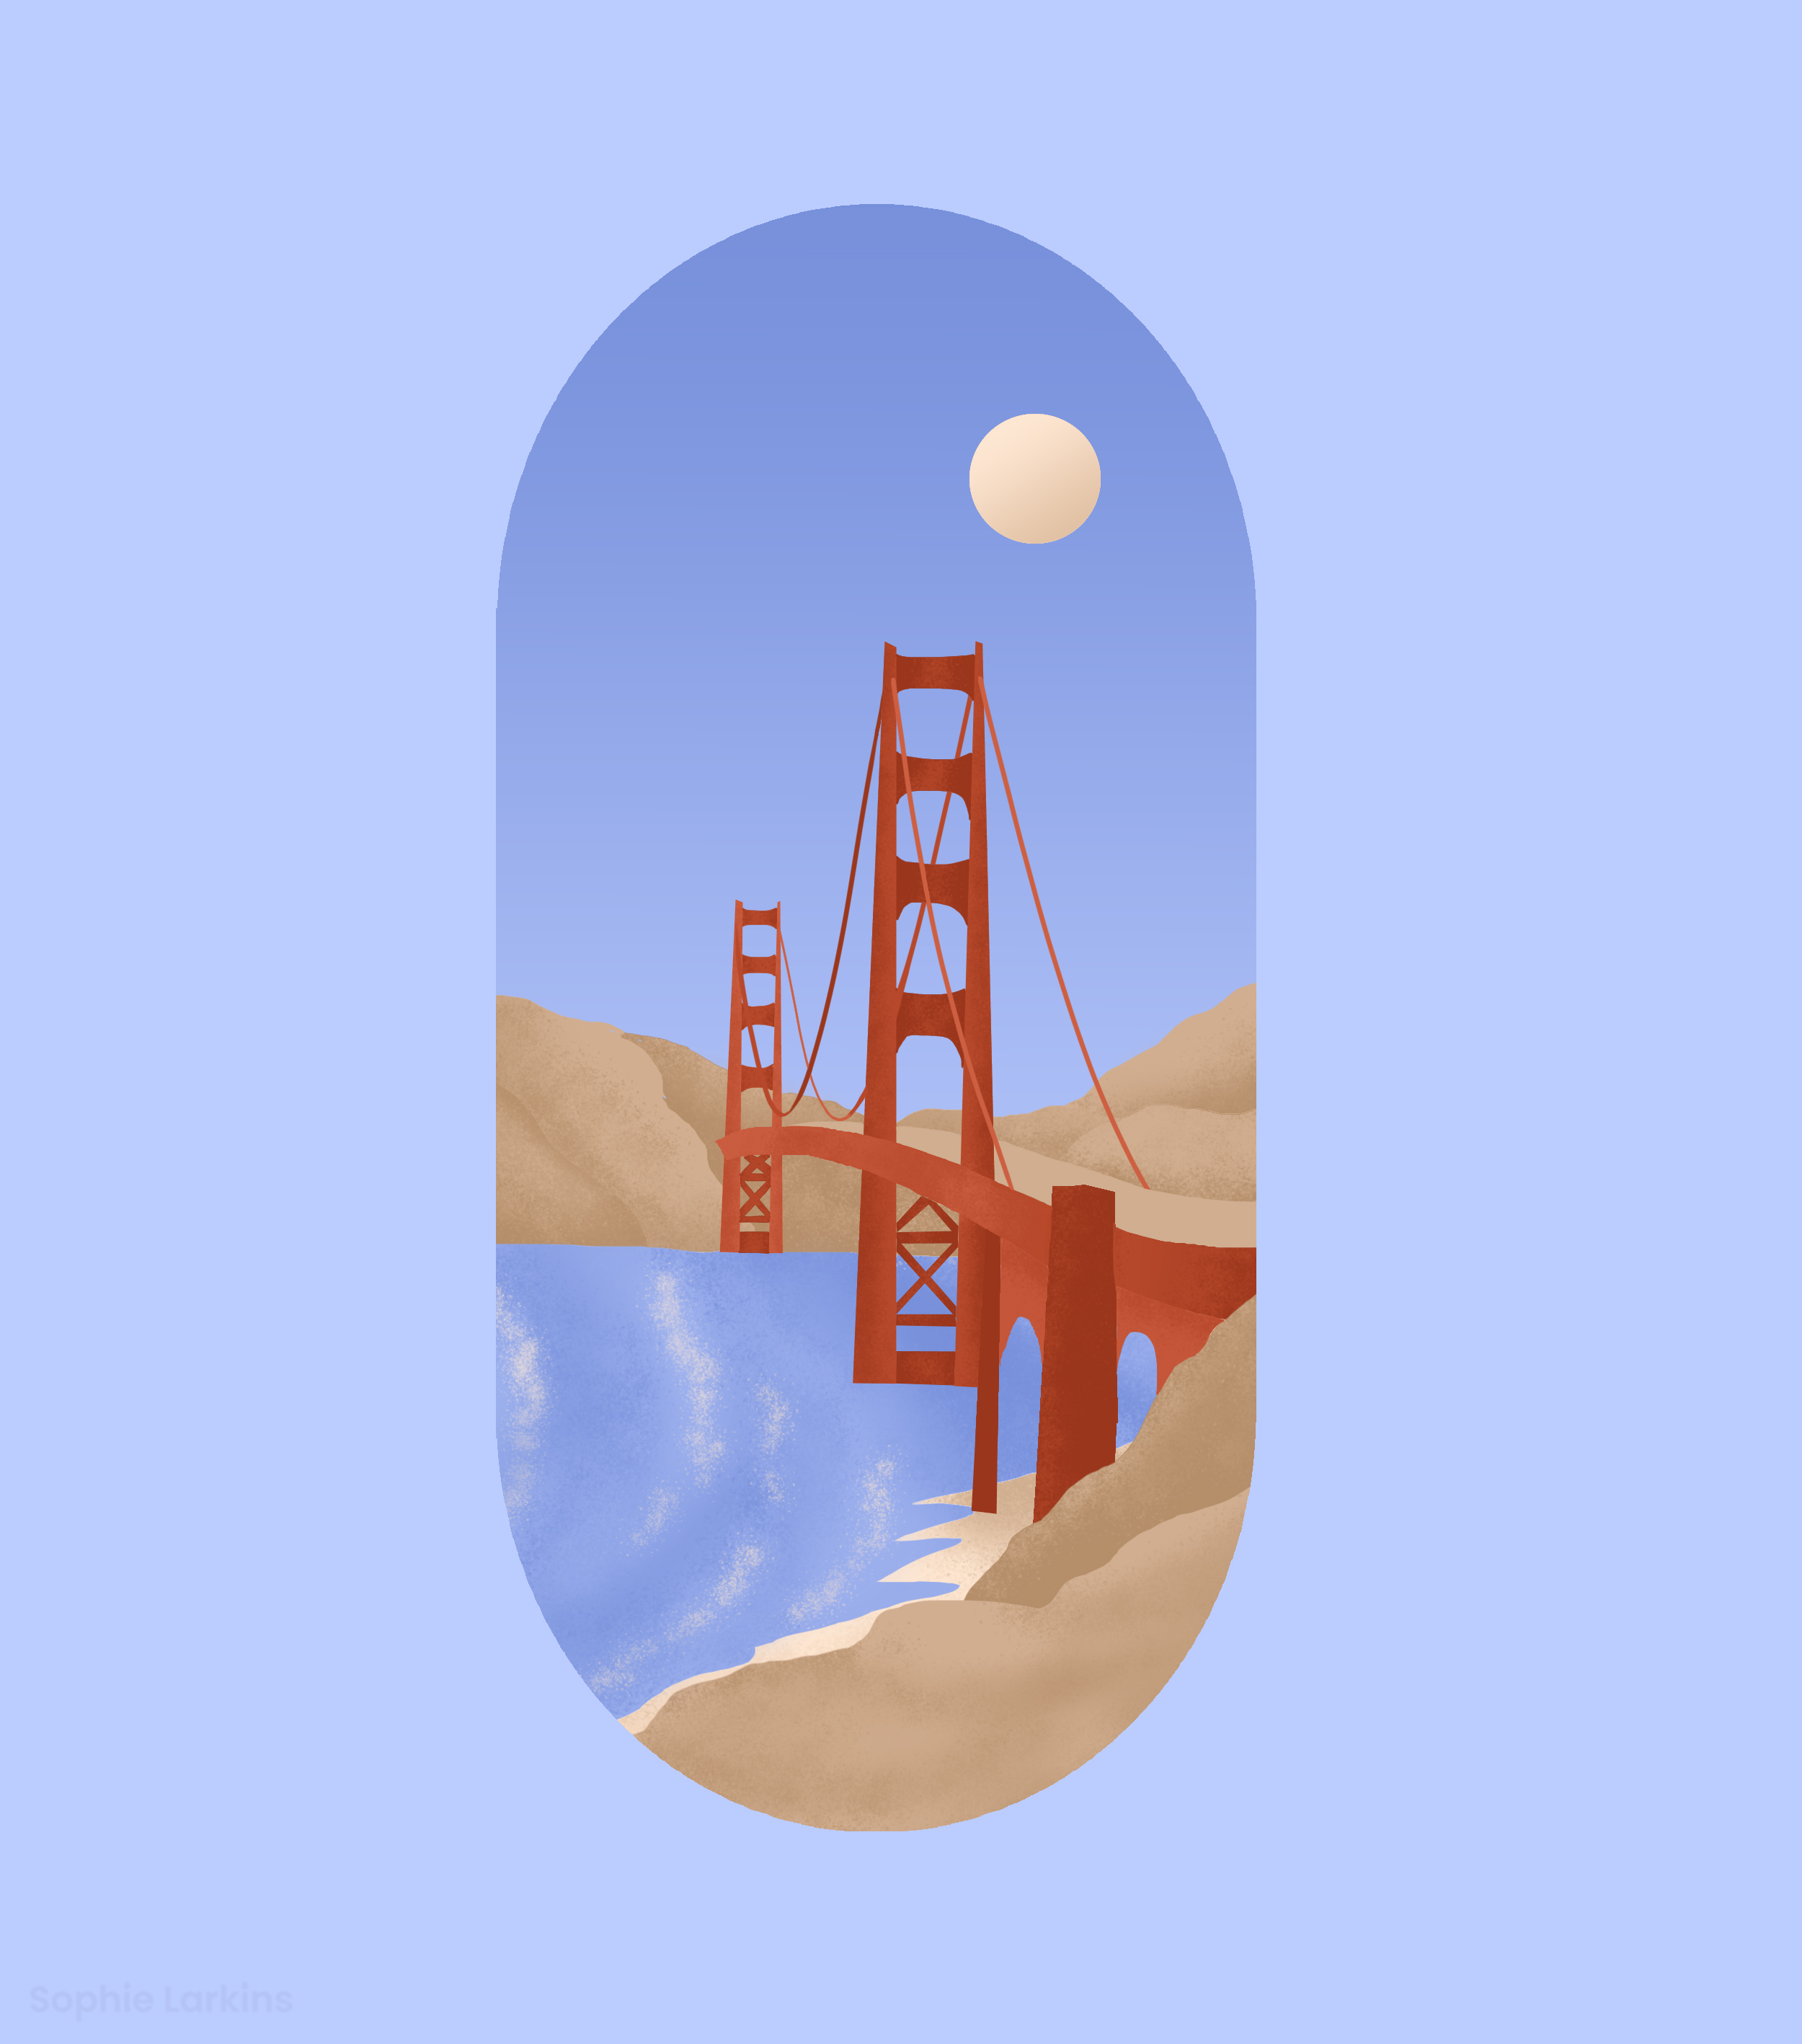 San Francisco's Golden Gate Bridge and surrounding hills in pastel blue, rusty red and cream colours